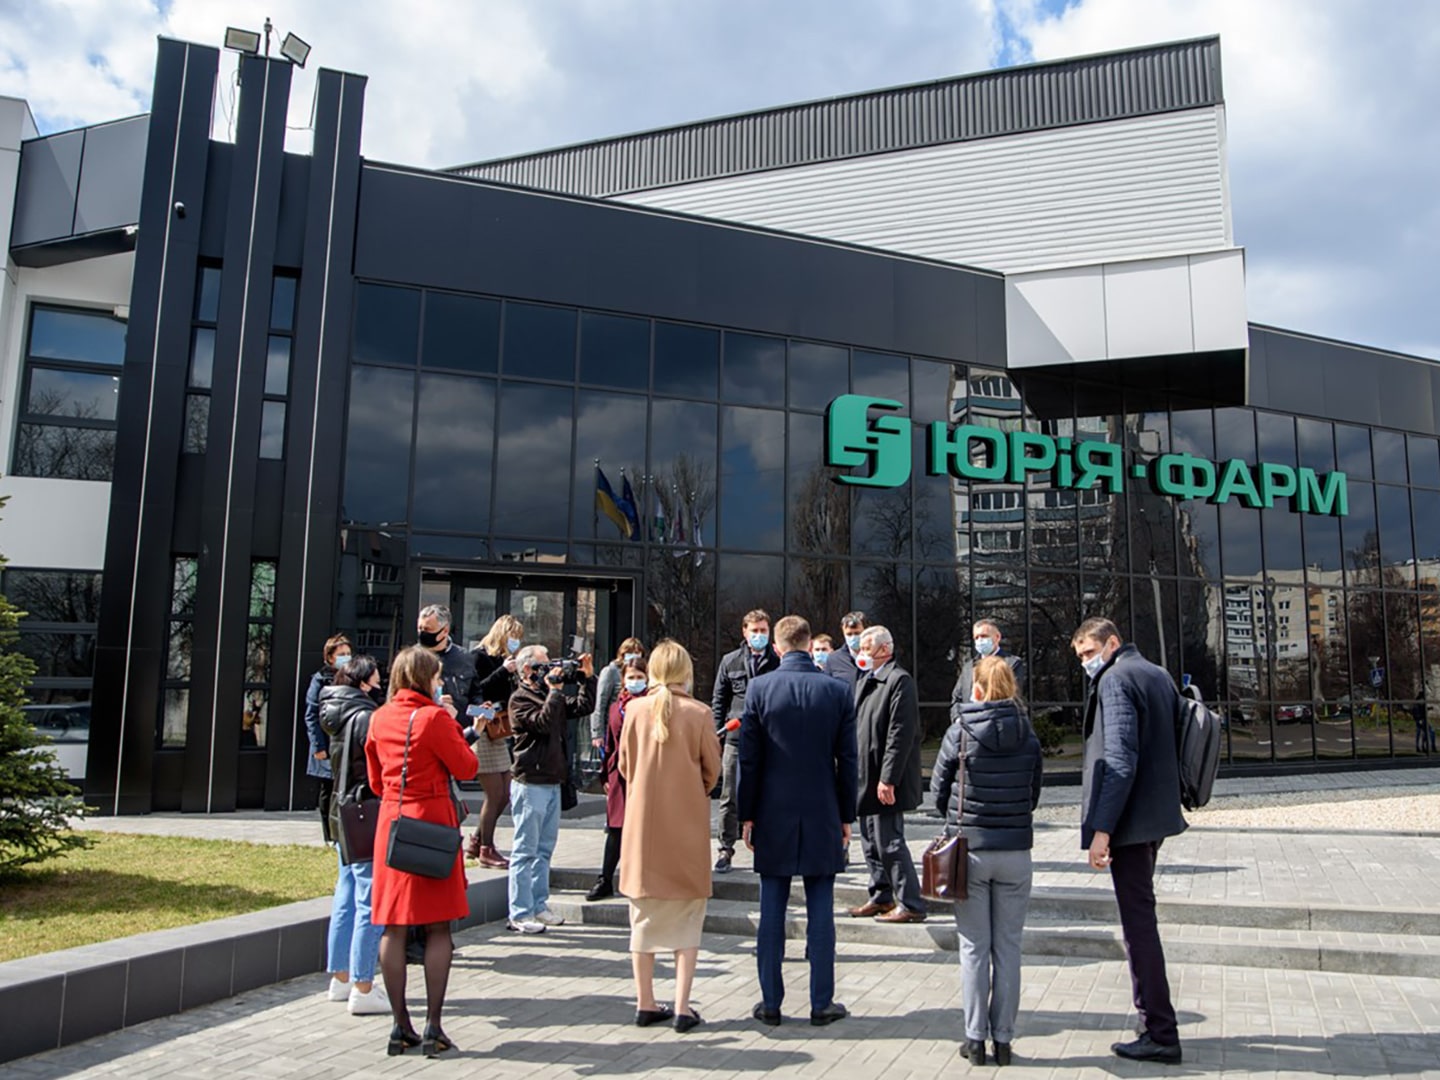 On 6 April, a delegation of guests and journalists headed by the Head of the Cherkasy Regional State Administration Oleksandr Skichko visited our production facilities in Cherkasy